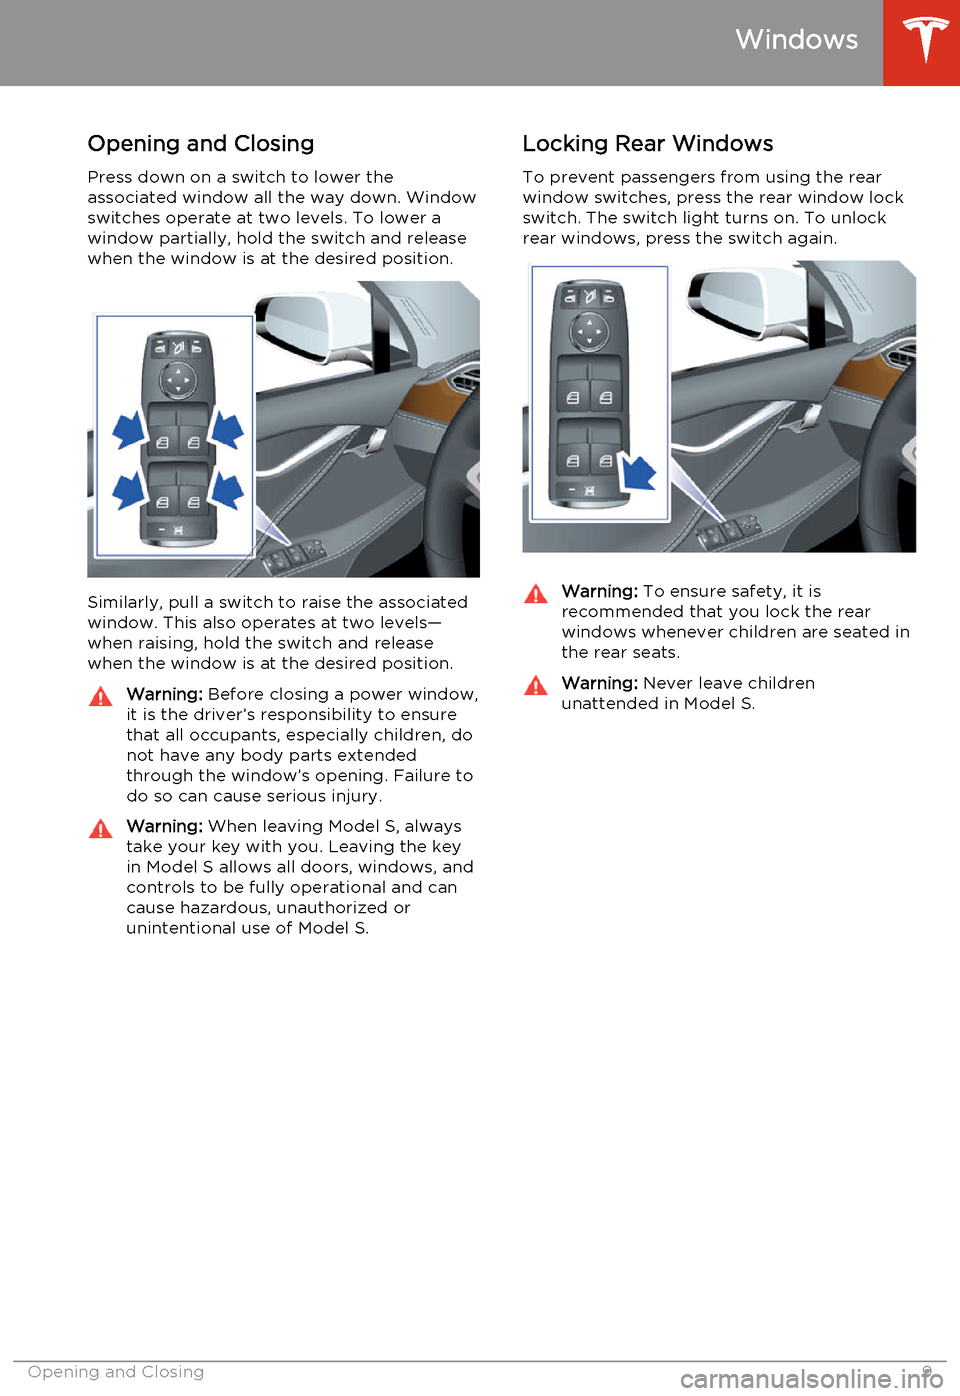 TESLA MODEL S 2014  Owners manual (North America) Opening and Closing
Press down on a switch to lower the
associated window all the way down. Window
switches operate at two levels. To lower a window partially, hold the switch and release
when the win